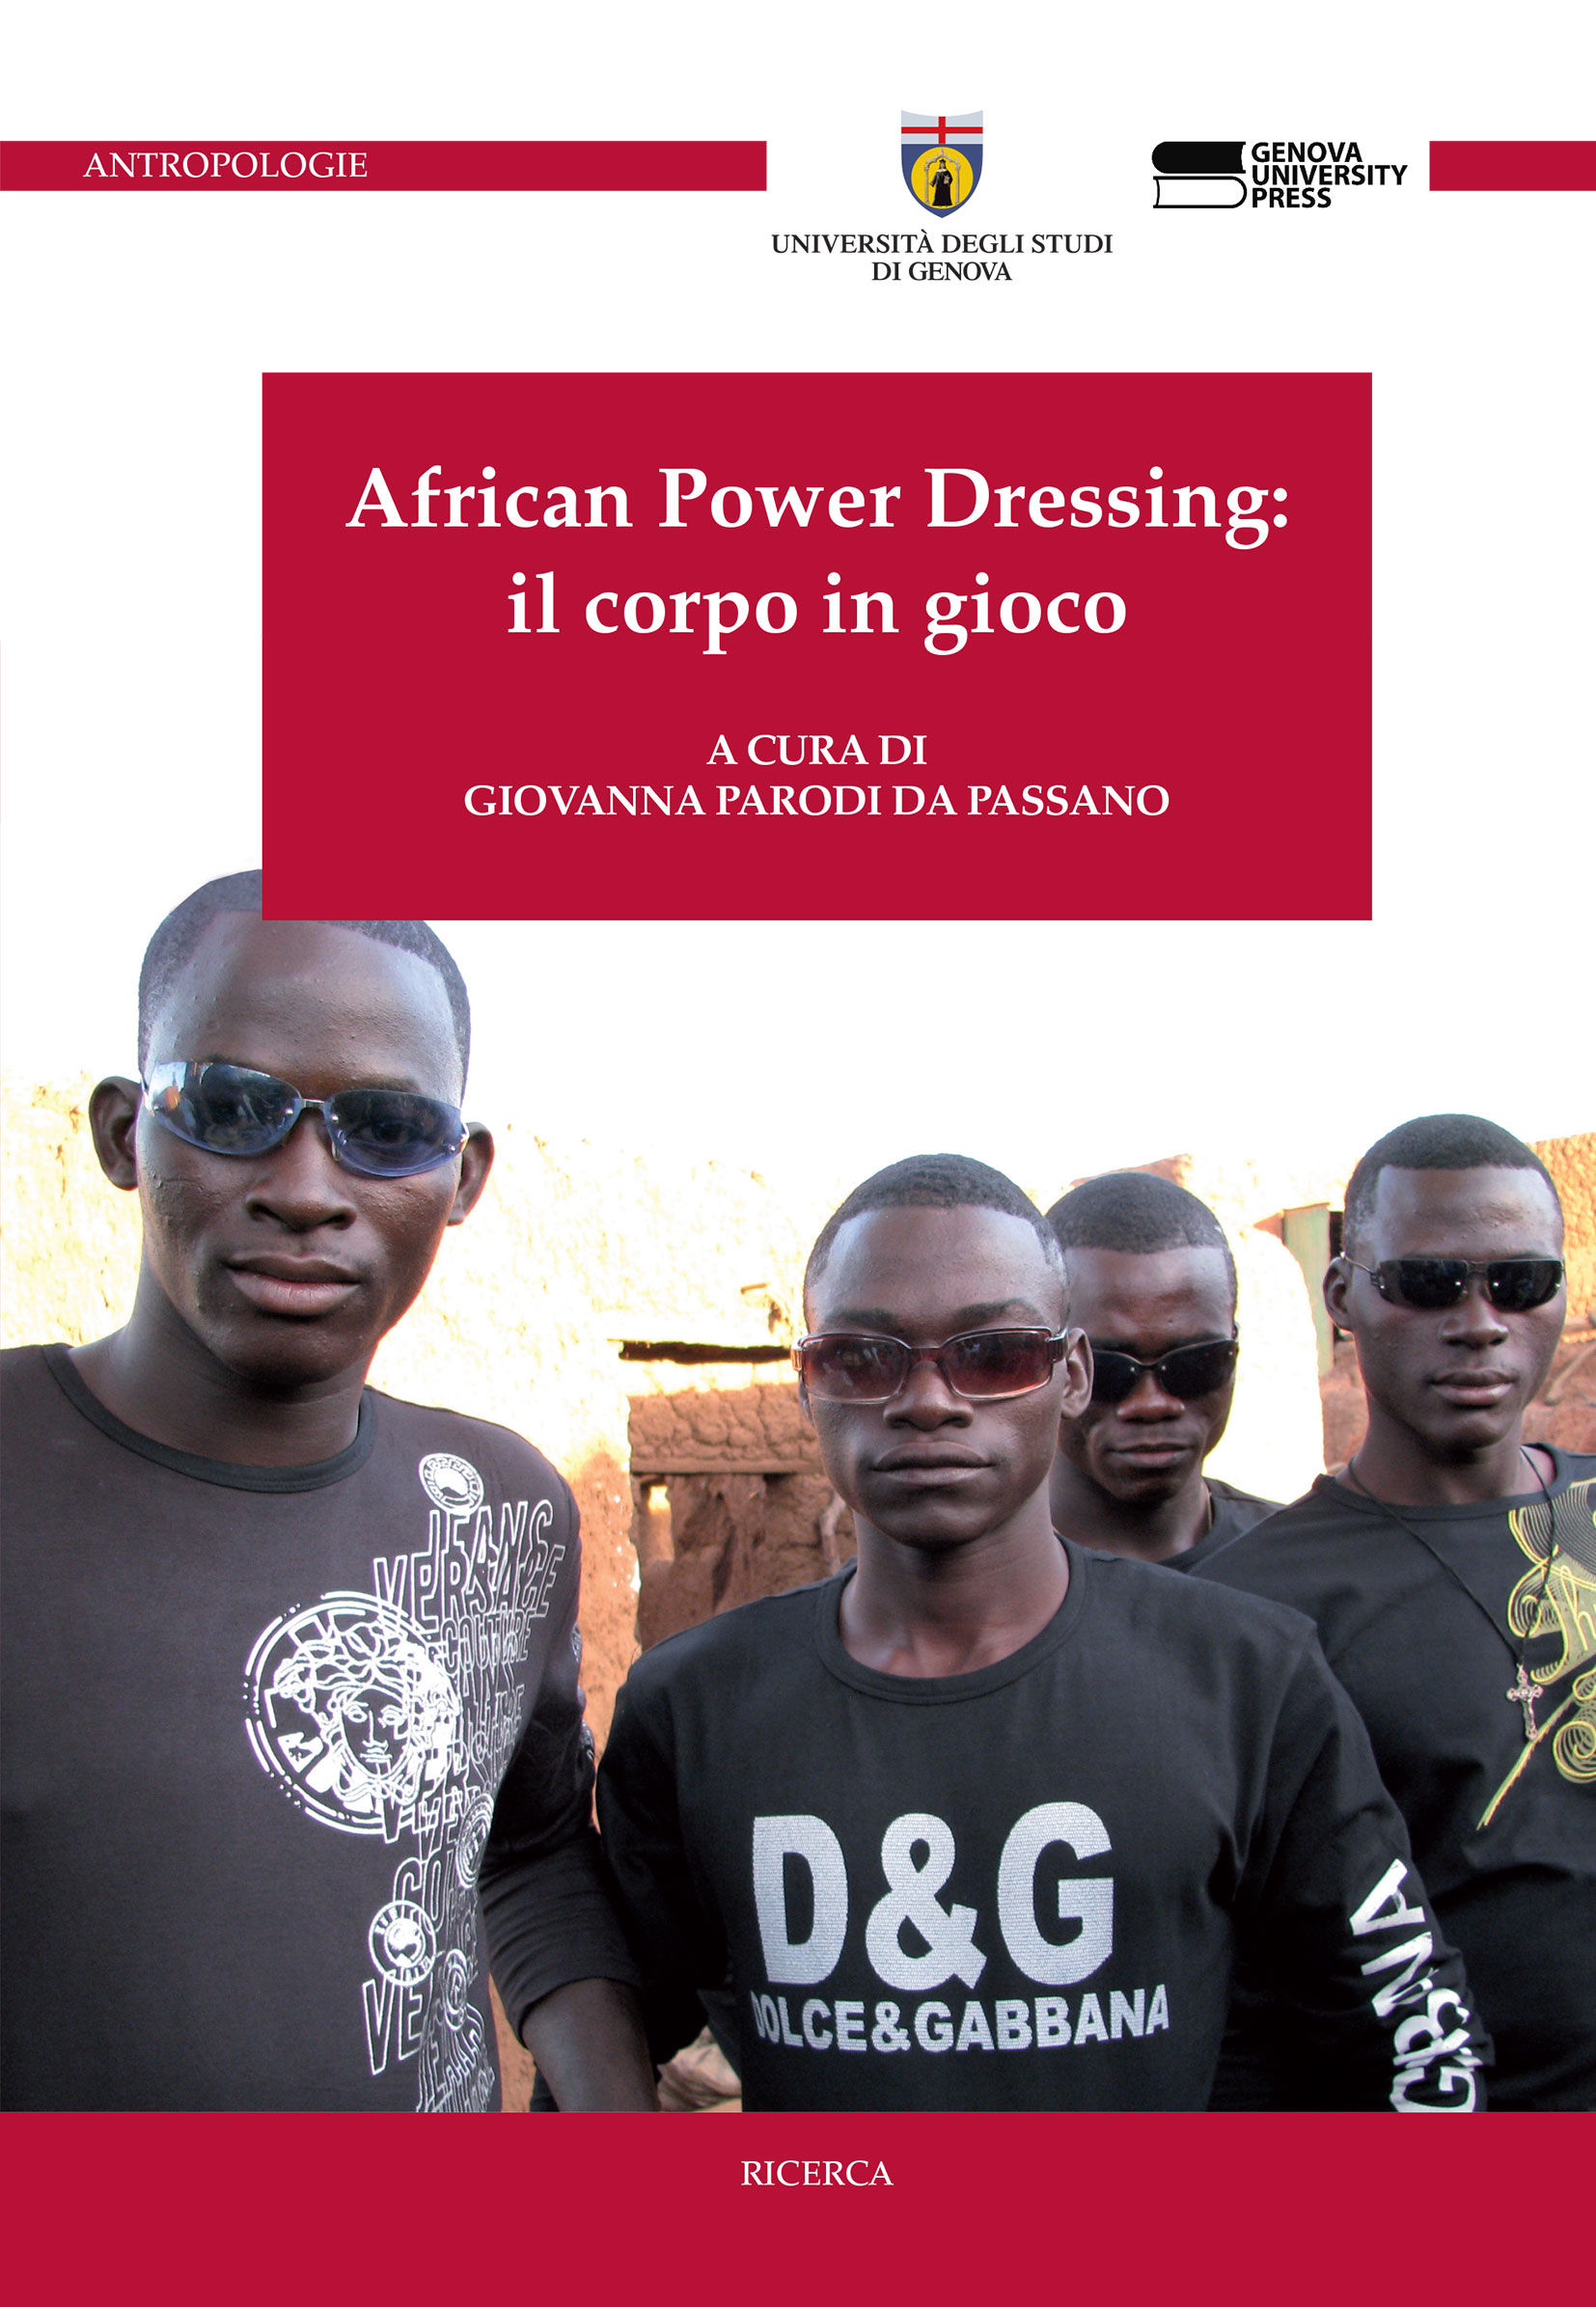 African Power Dressing: il corpo in gioco